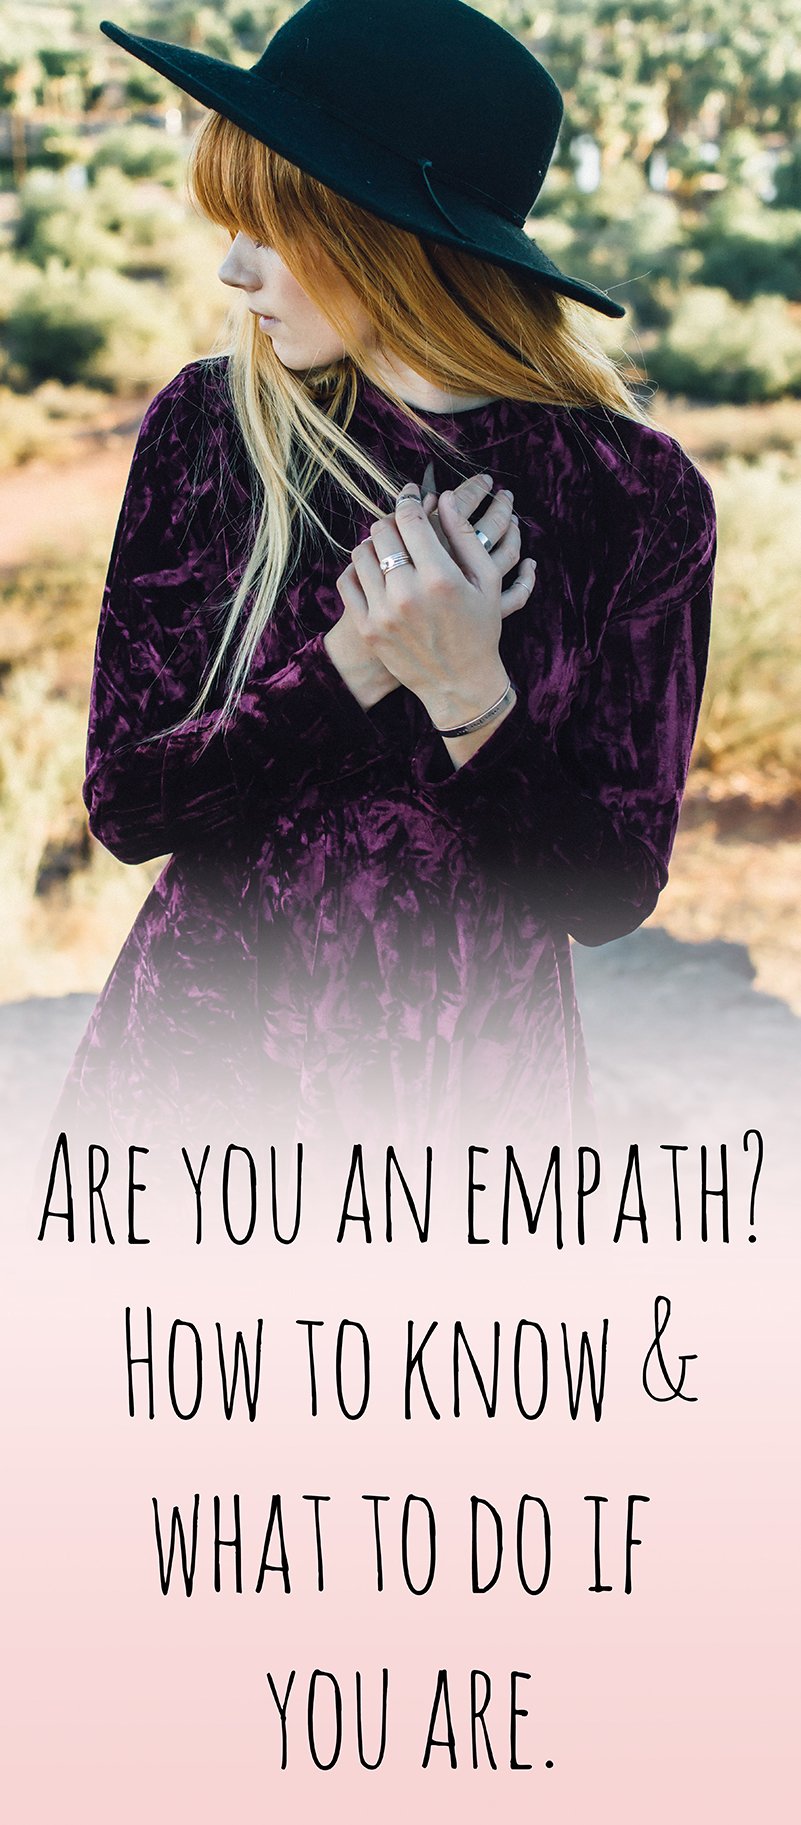 What Is an Empath and How Do You Know If You Are One?